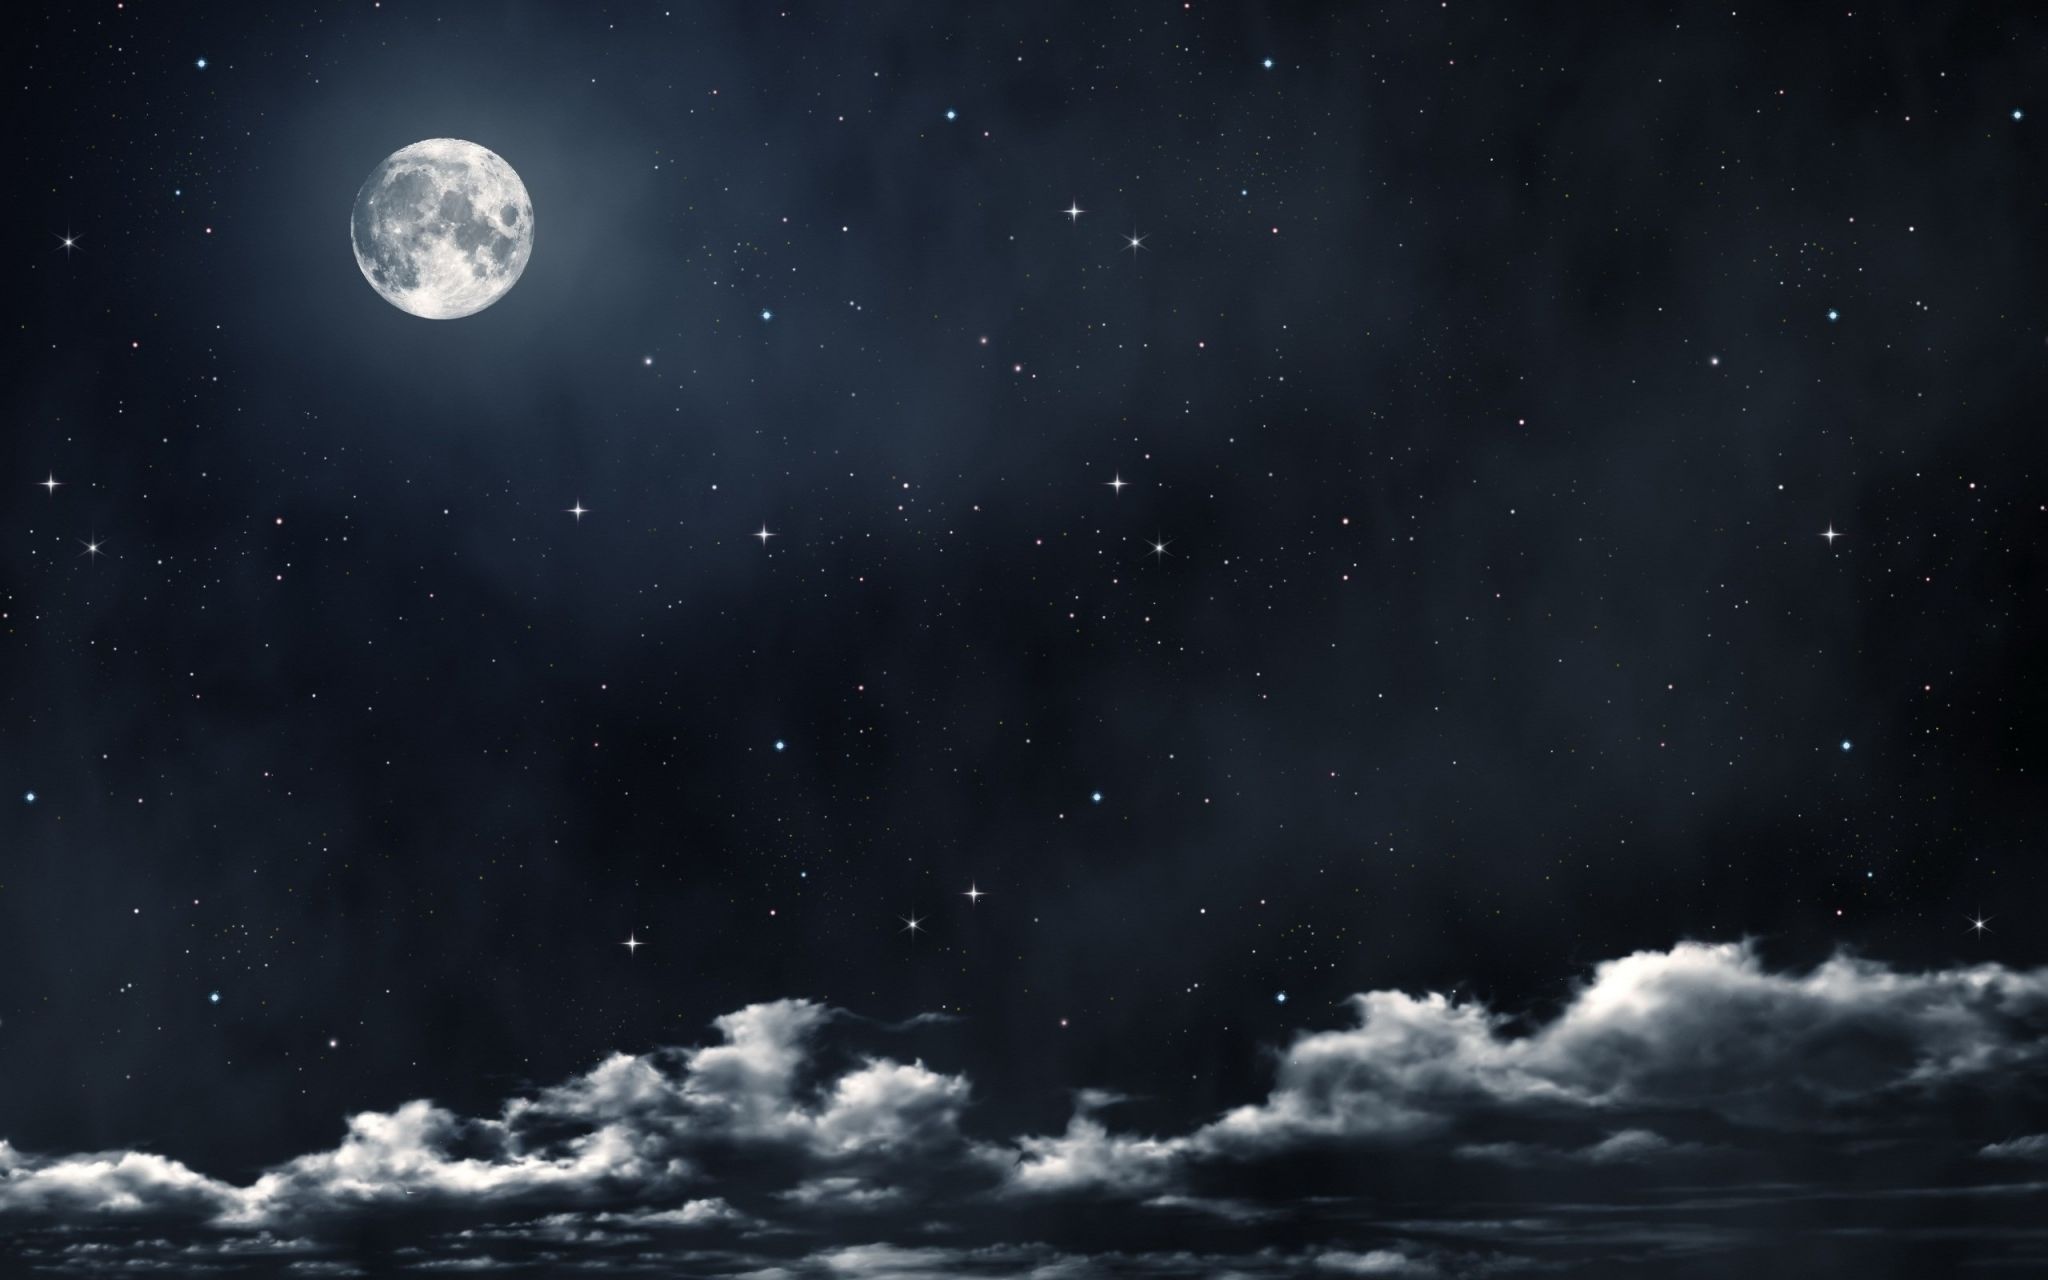 night sky beautiful picture for wallpaper. Moon and stars wallpaper, Sky moon, Night sky moon